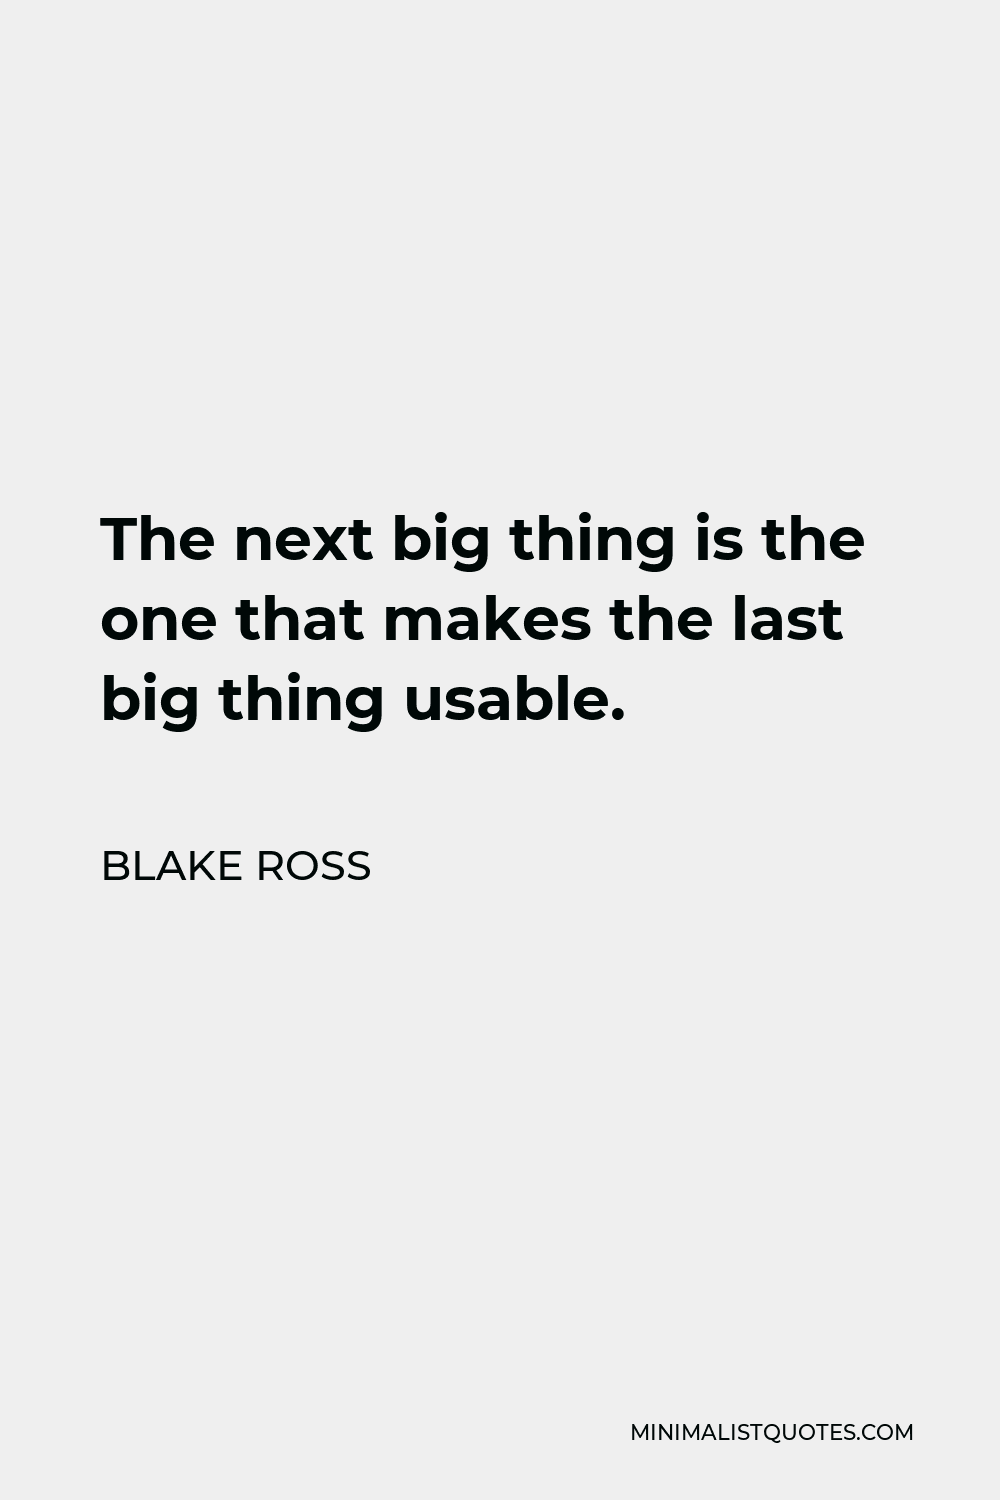 Blake Ross Quote - The next big thing is the one that makes the last big thing usable.